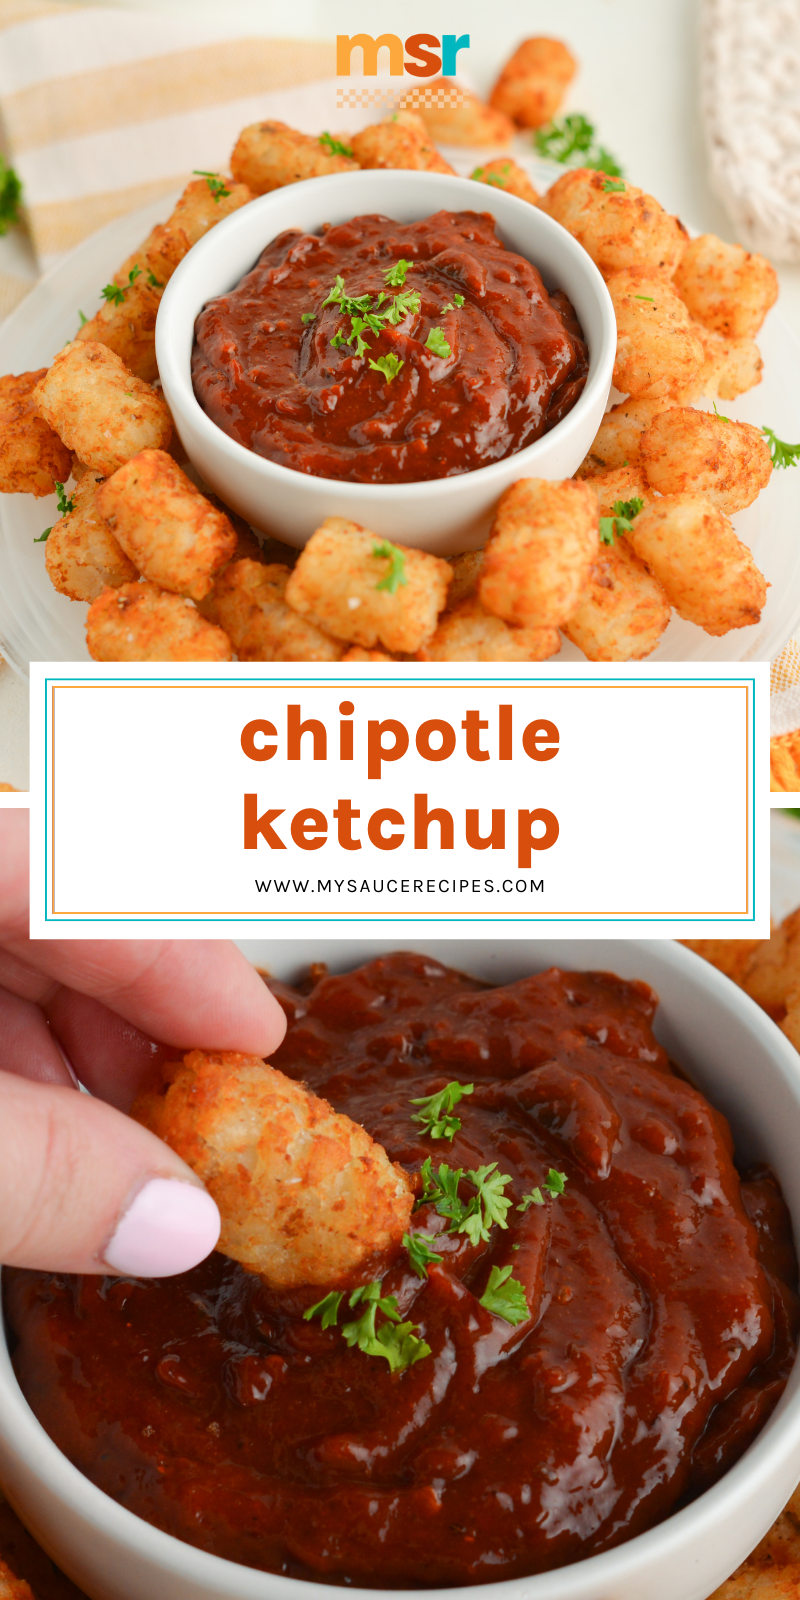 EASY Chipotle Ketchup Recipe - Only 3 Ingredients &amp; Less Than 5 Mins!